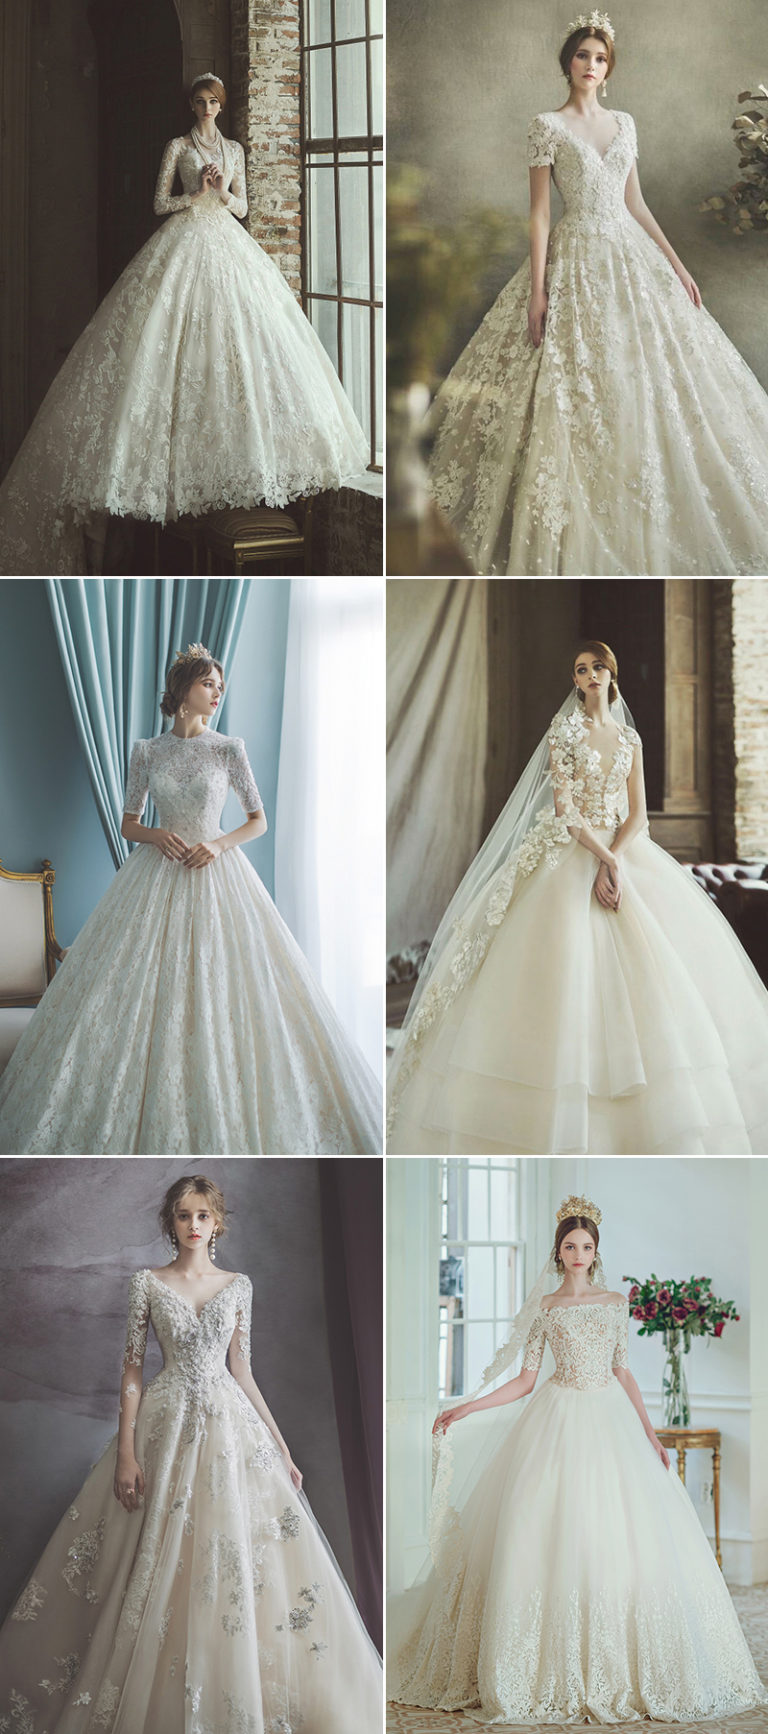 The Wedding Dress Wish List from Brides-to-be! 5 Gown Styles Brides ...